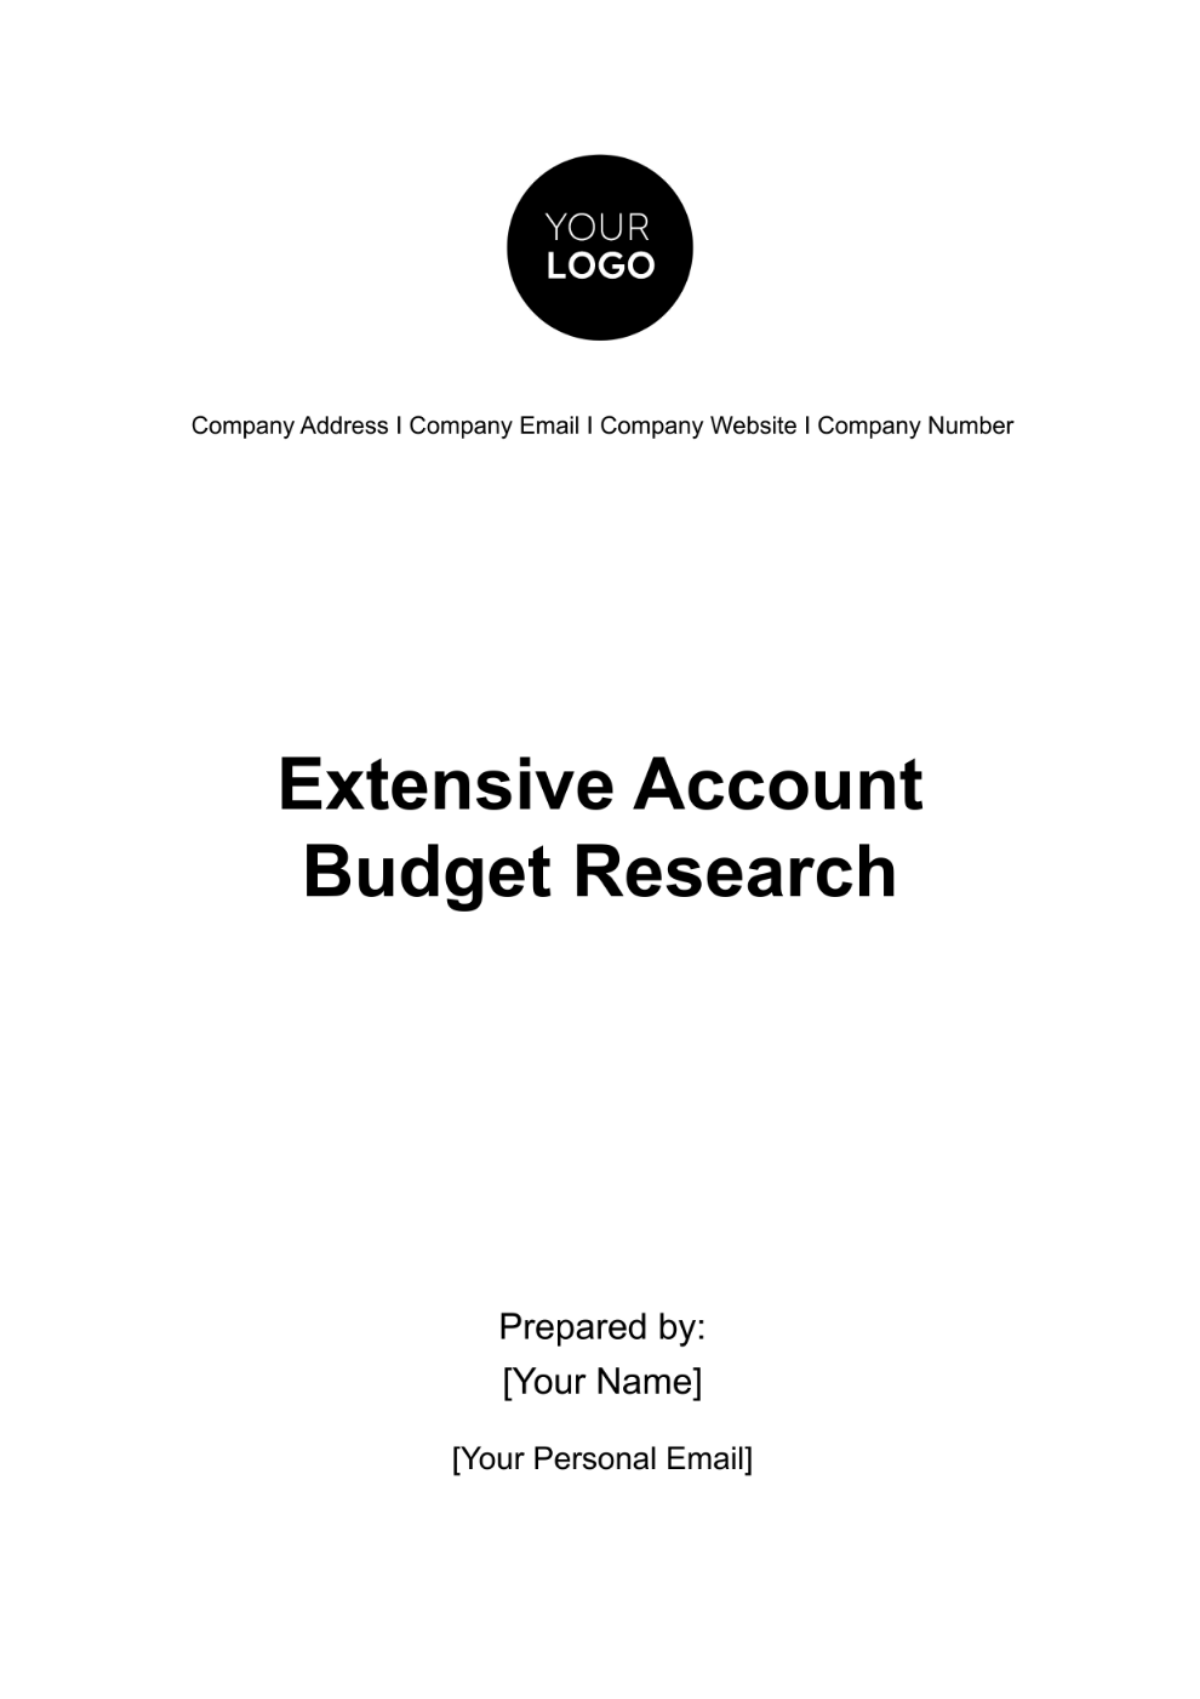 Extensive Account Budget Research Template